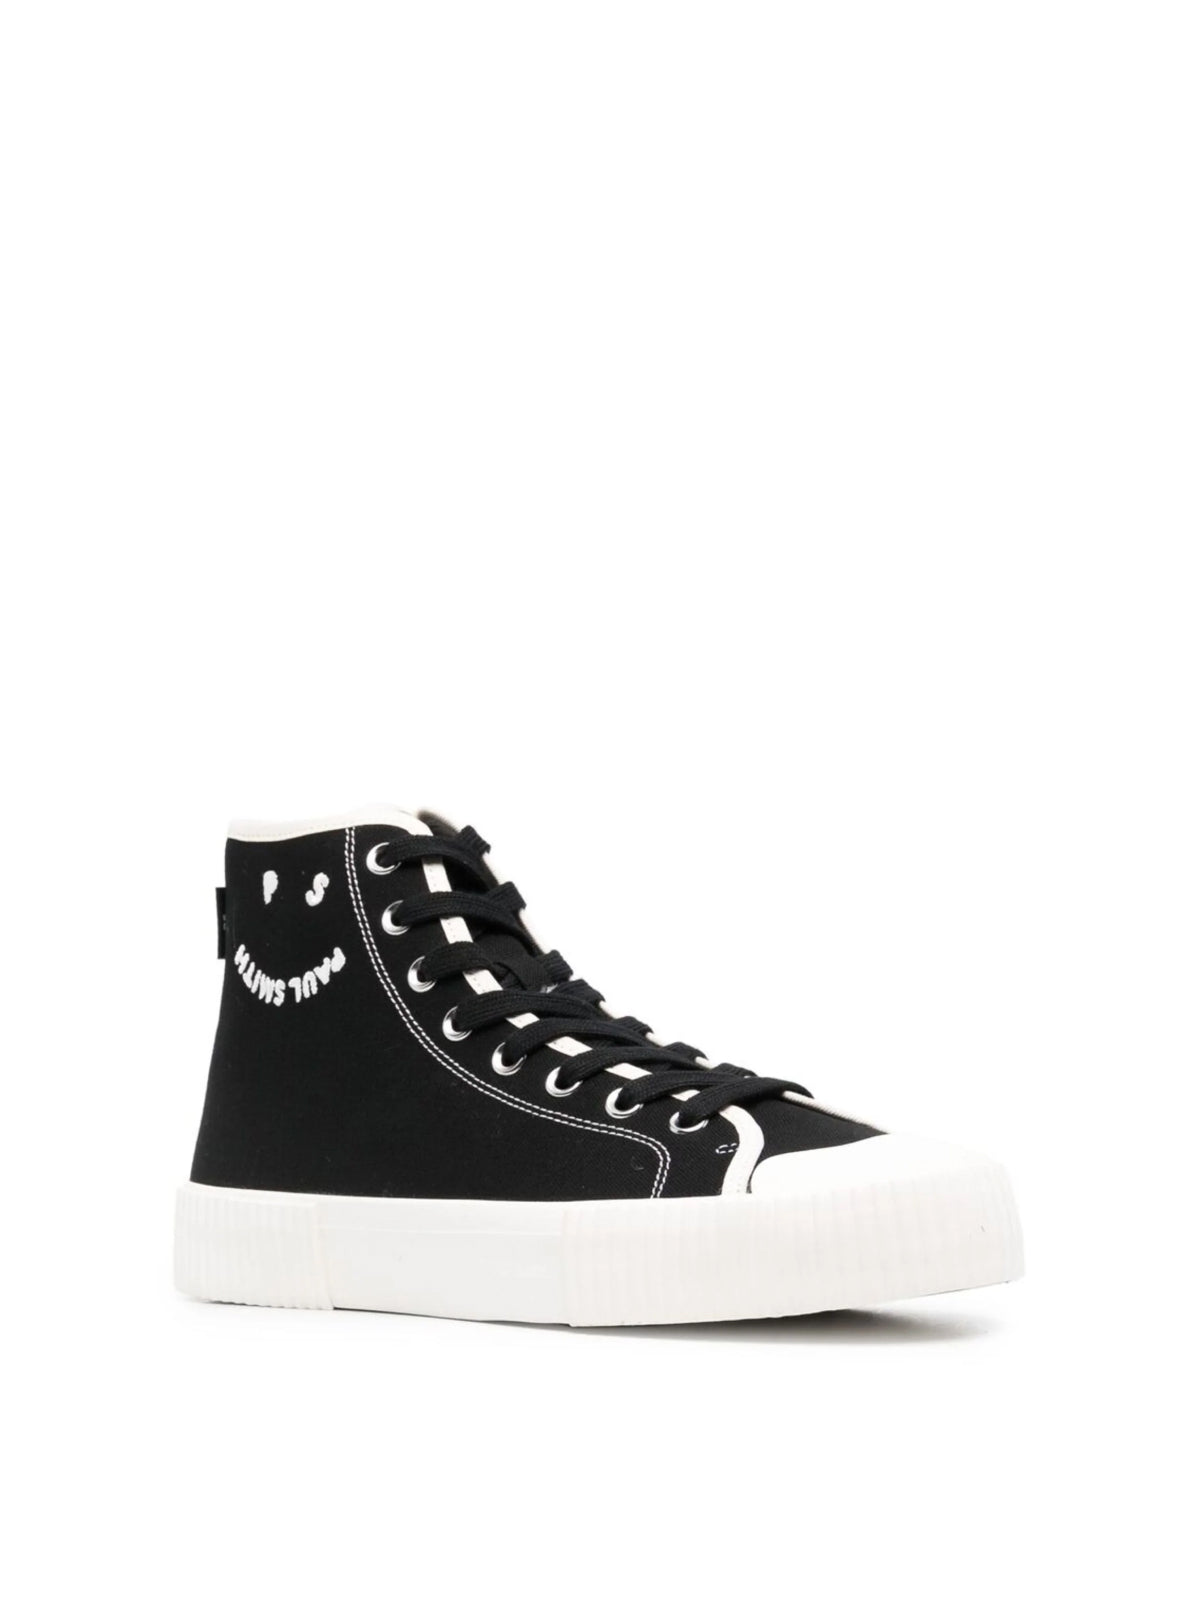 Paul Smith-OUTLET-SALE-Kibby Logo High-Top Sneakers-ARCHIVIST